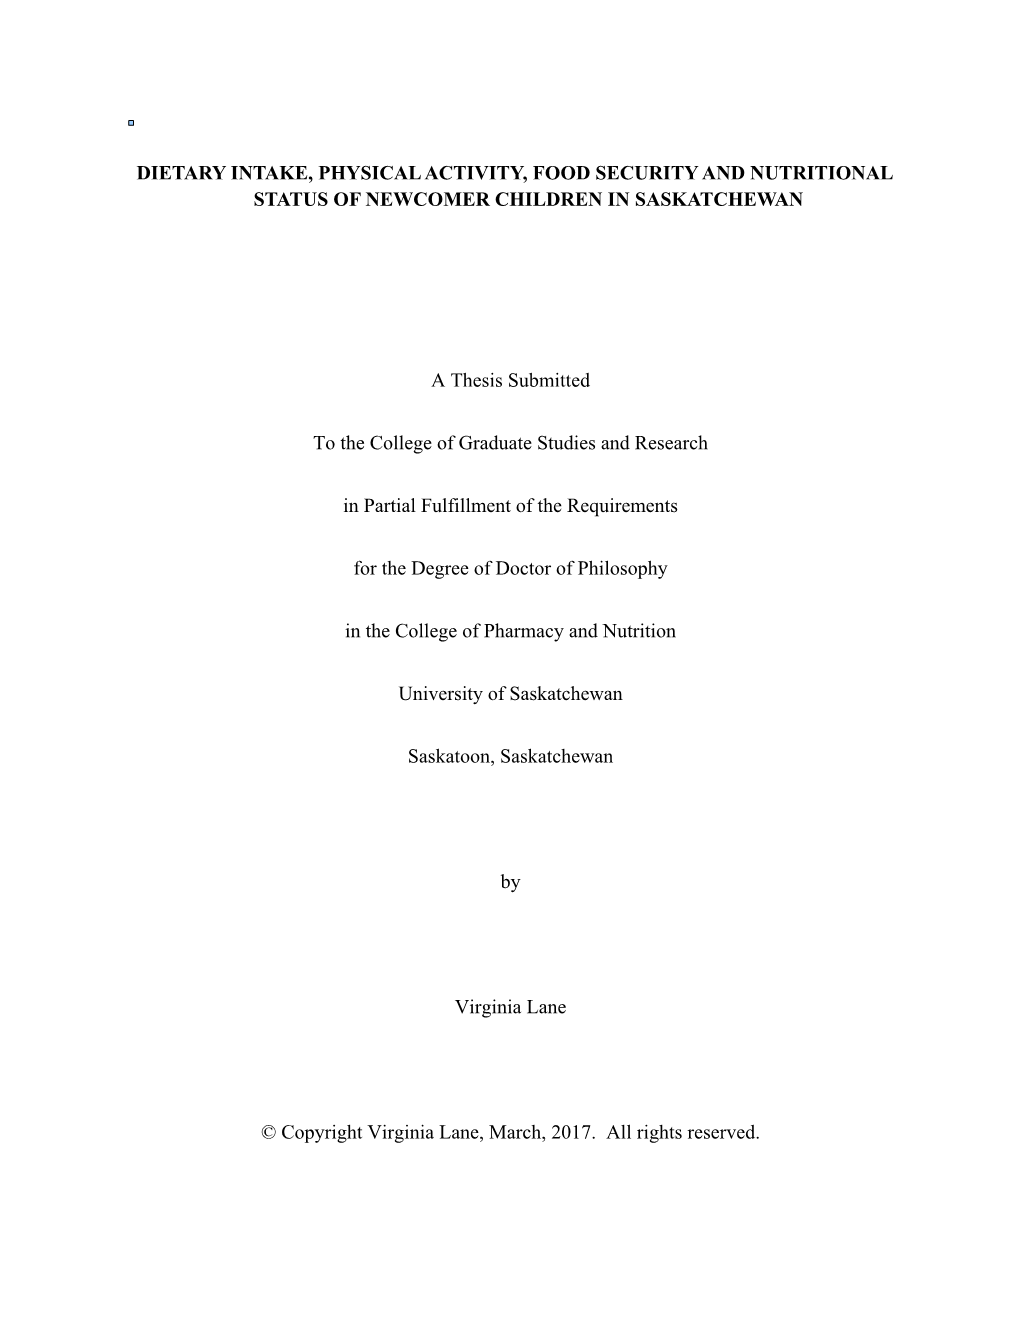 DIETARY INTAKE, PHYSICAL ACTIVITY, FOOD SECURITY and NUTRITIONAL STATUS of NEWCOMER CHILDREN in SASKATCHEWAN a Thesis Submitted